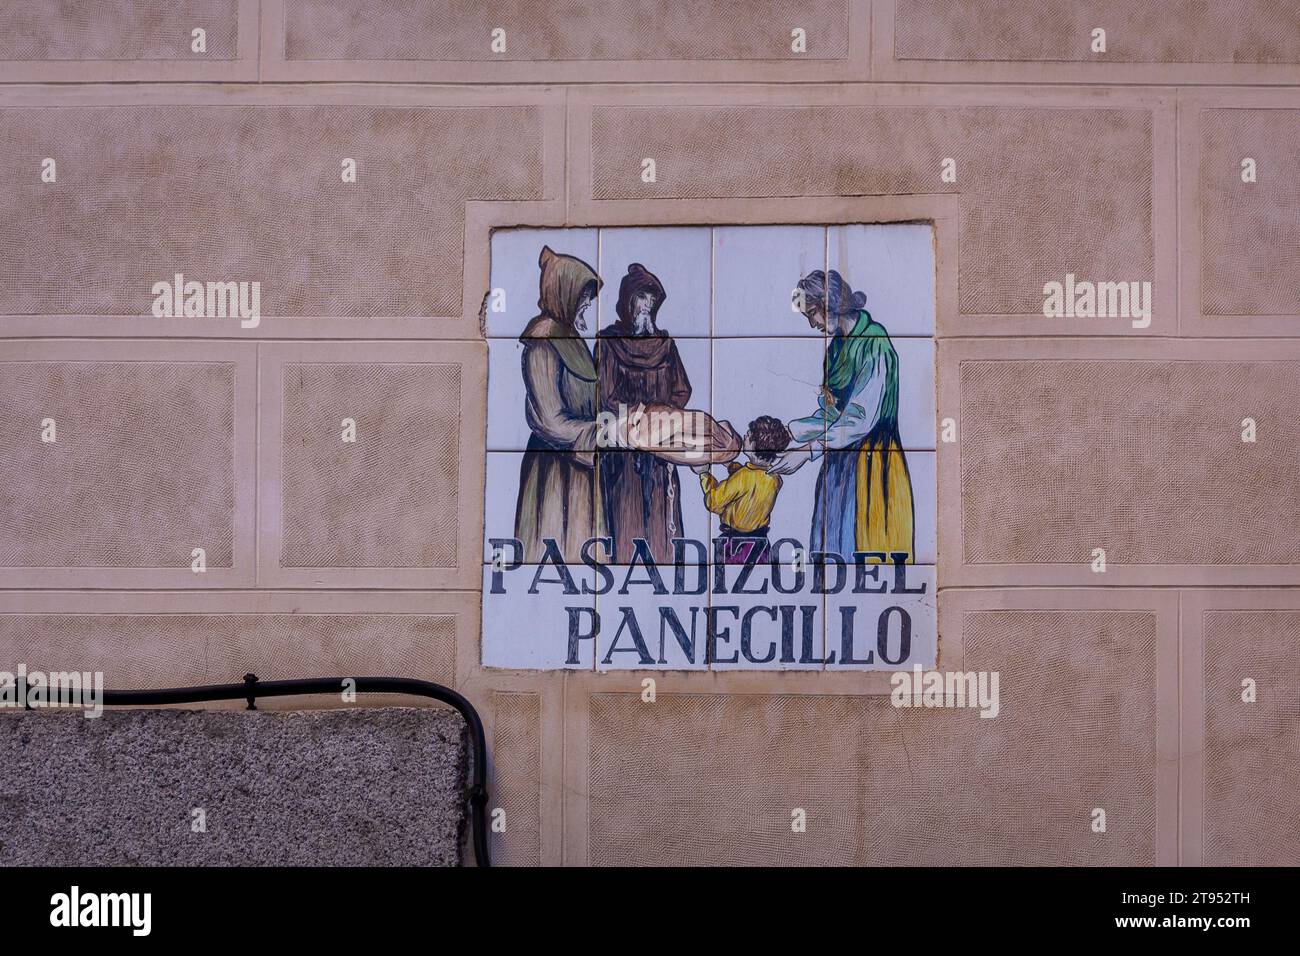 Traditional medieval tiled street sign 'Pasadizo del Panecillo' (translation: The Bread Passage) embedded in the brick building facade in Madrid,Spain Stock Photo